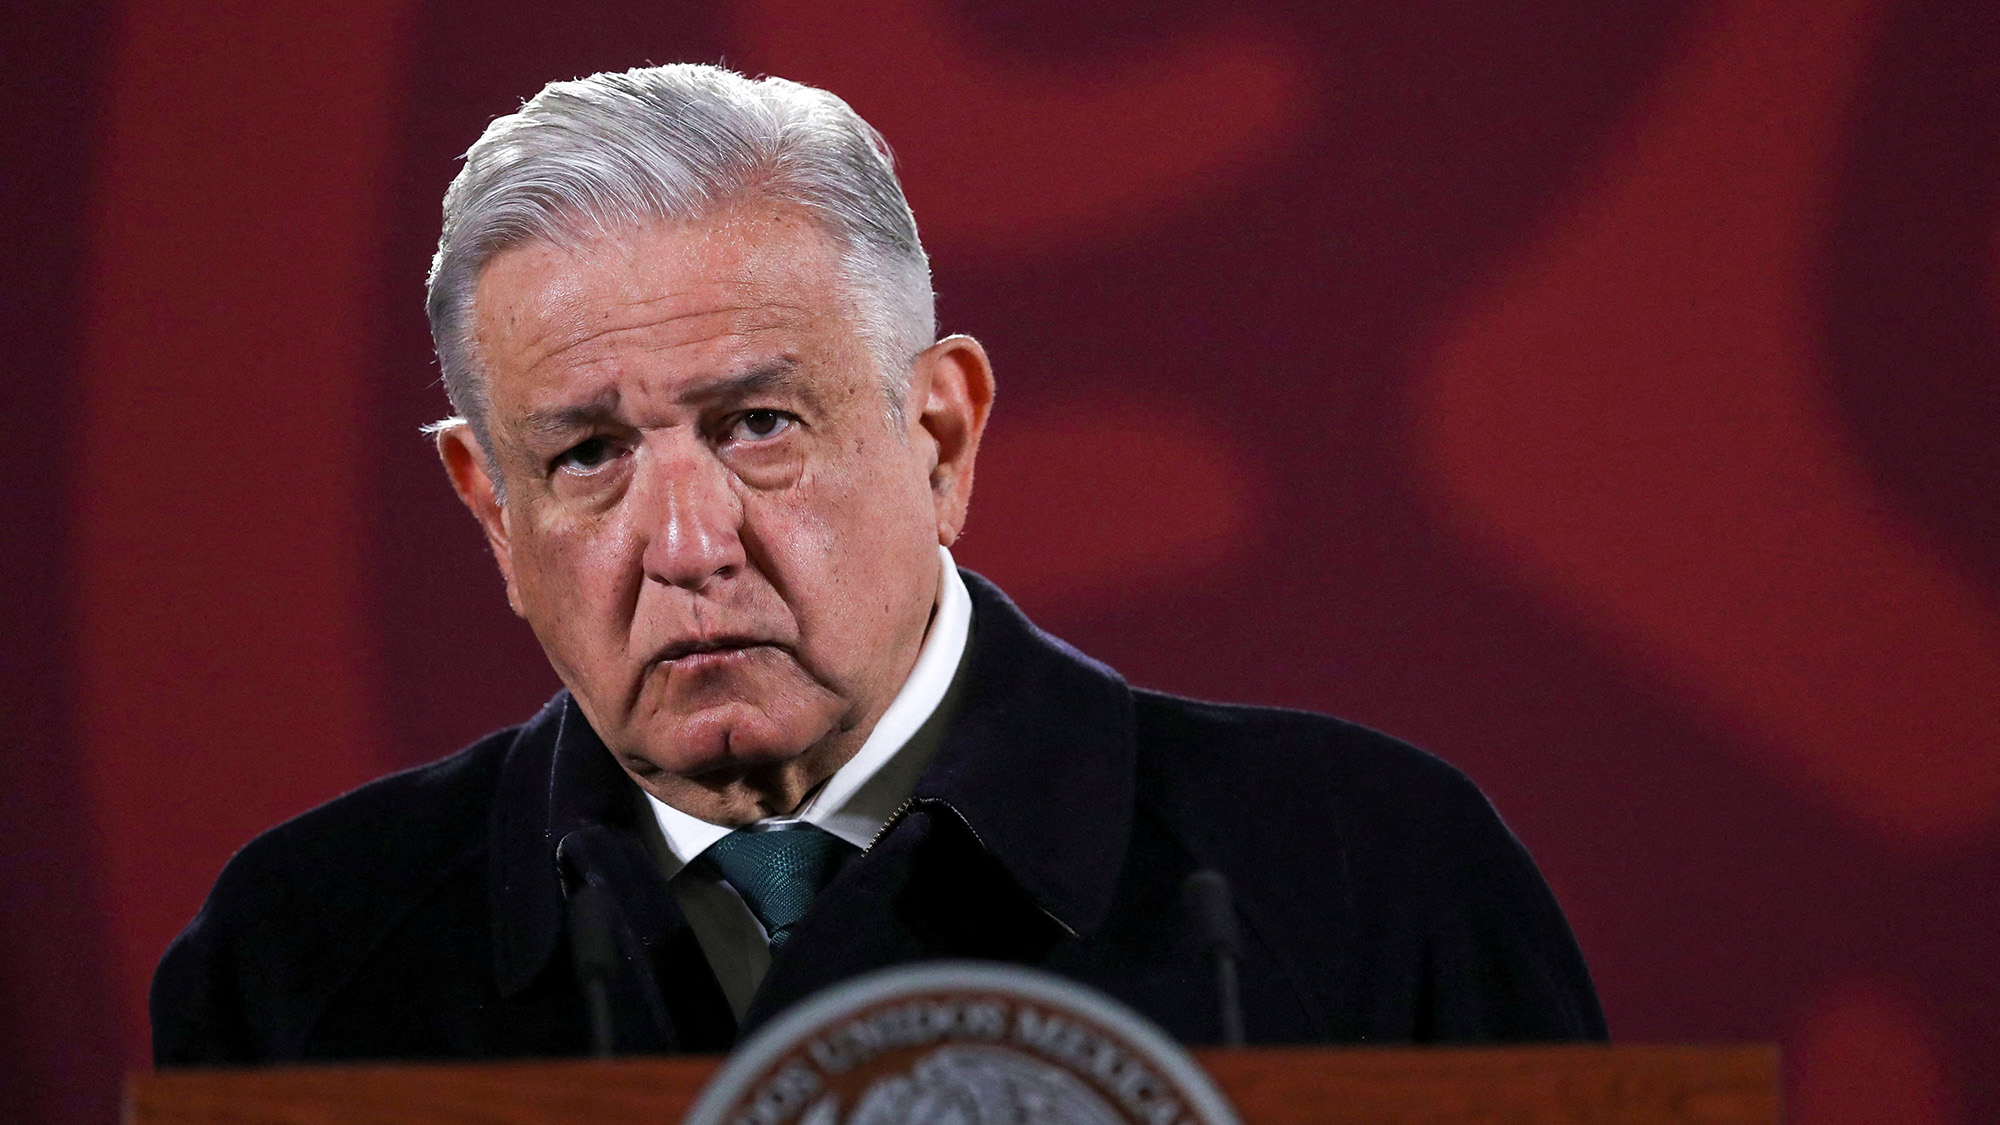 Mexico's President Andres Manuel Lopez Obrador speaks during a news conference at the National Palace in Mexico City on February 10.